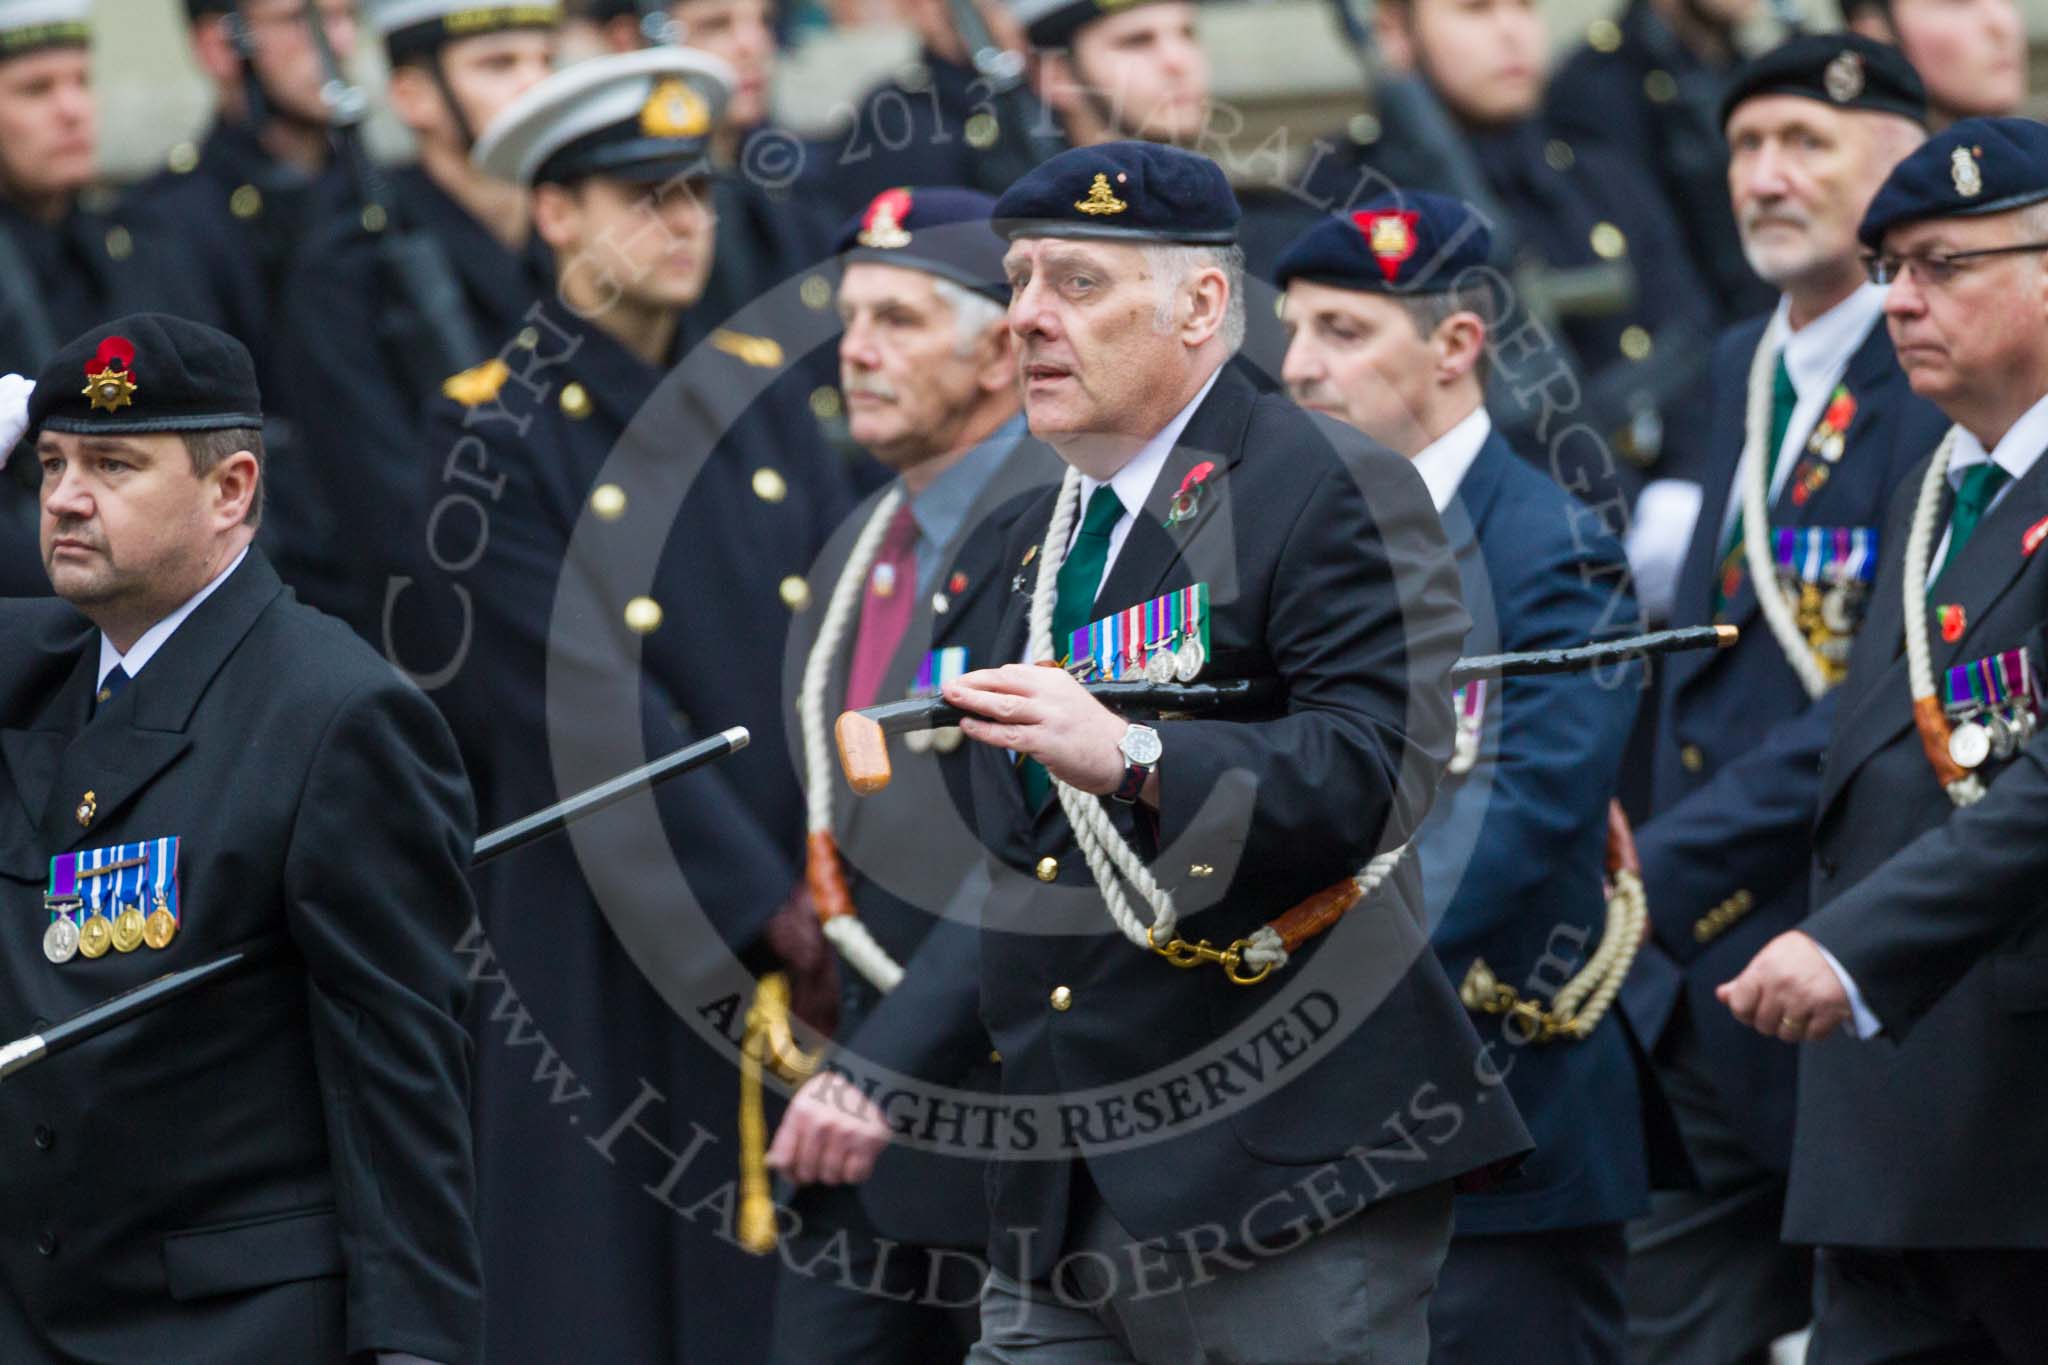 Remembrance Sunday at the Cenotaph 2015: Group D4, Army Dog Unit Northern Ireland Association.
Cenotaph, Whitehall, London SW1,
London,
Greater London,
United Kingdom,
on 08 November 2015 at 11:52, image #604